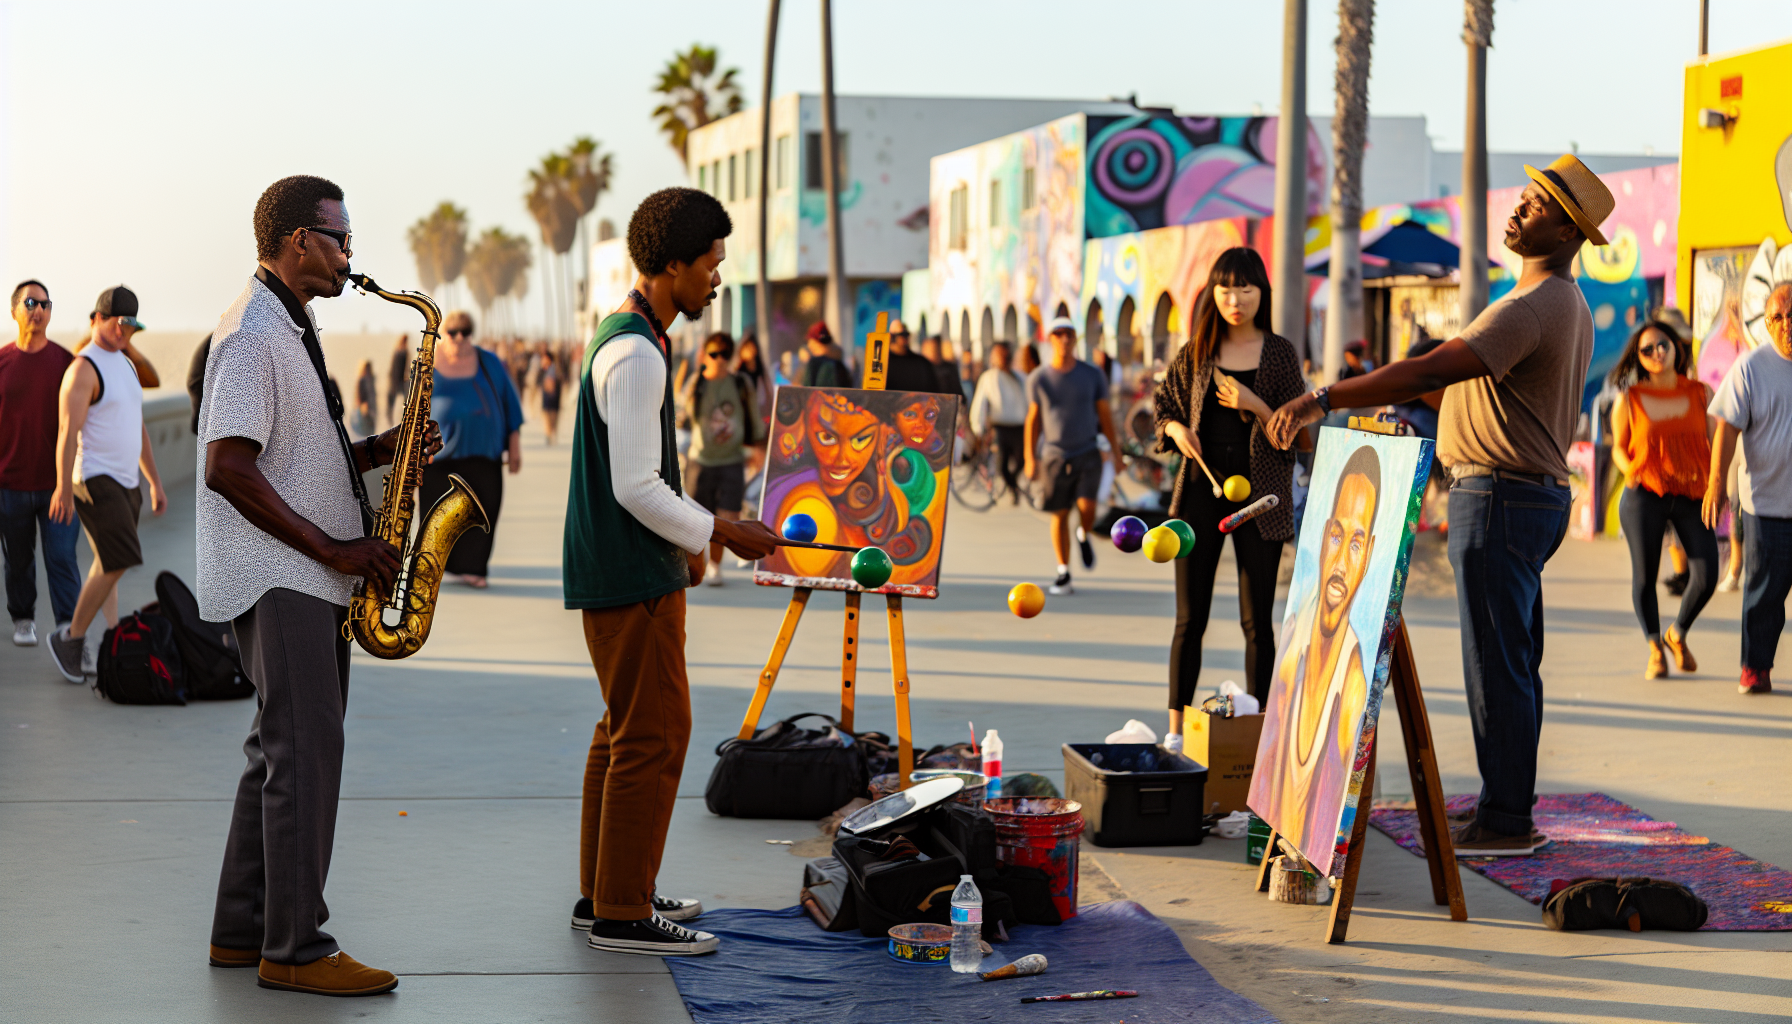 Artistic expressions and street performers at Venice Beach Boardwalk